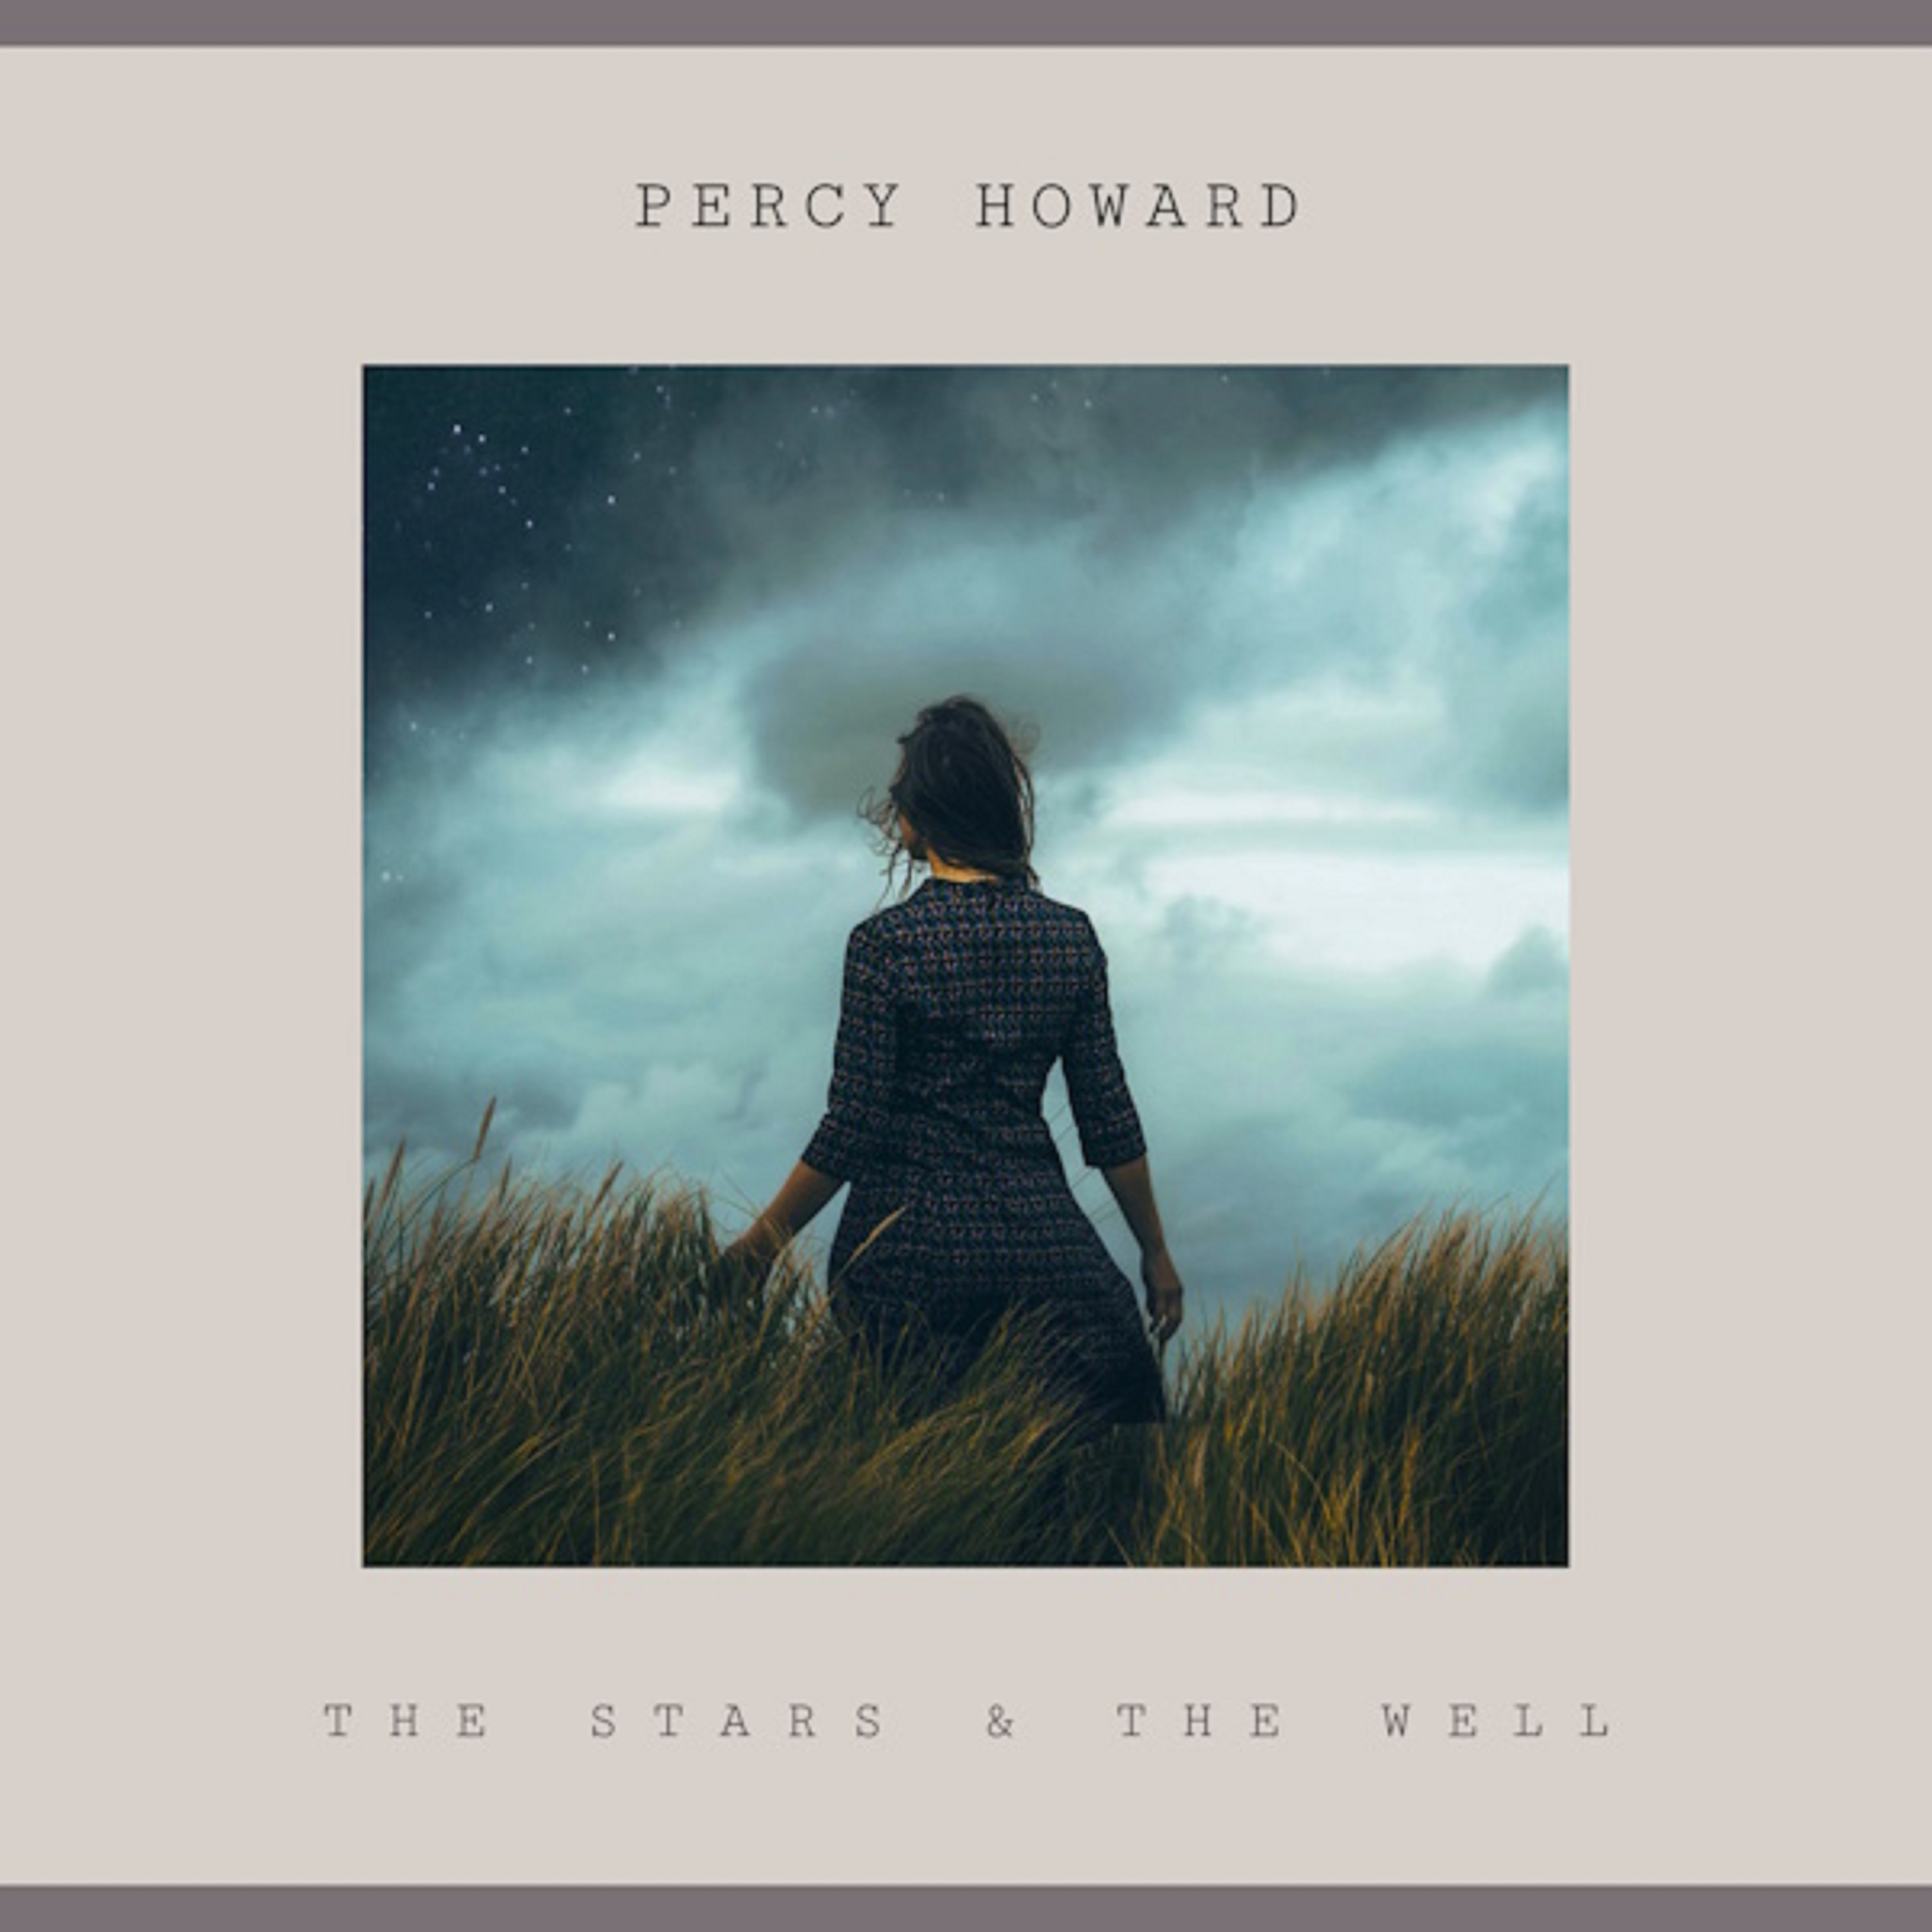 Singer-Songwriter Percy Howard Releases New Album “The Stars and The Well” Featuring Fred Frith, Vernon Reid & Matt Chamberlain